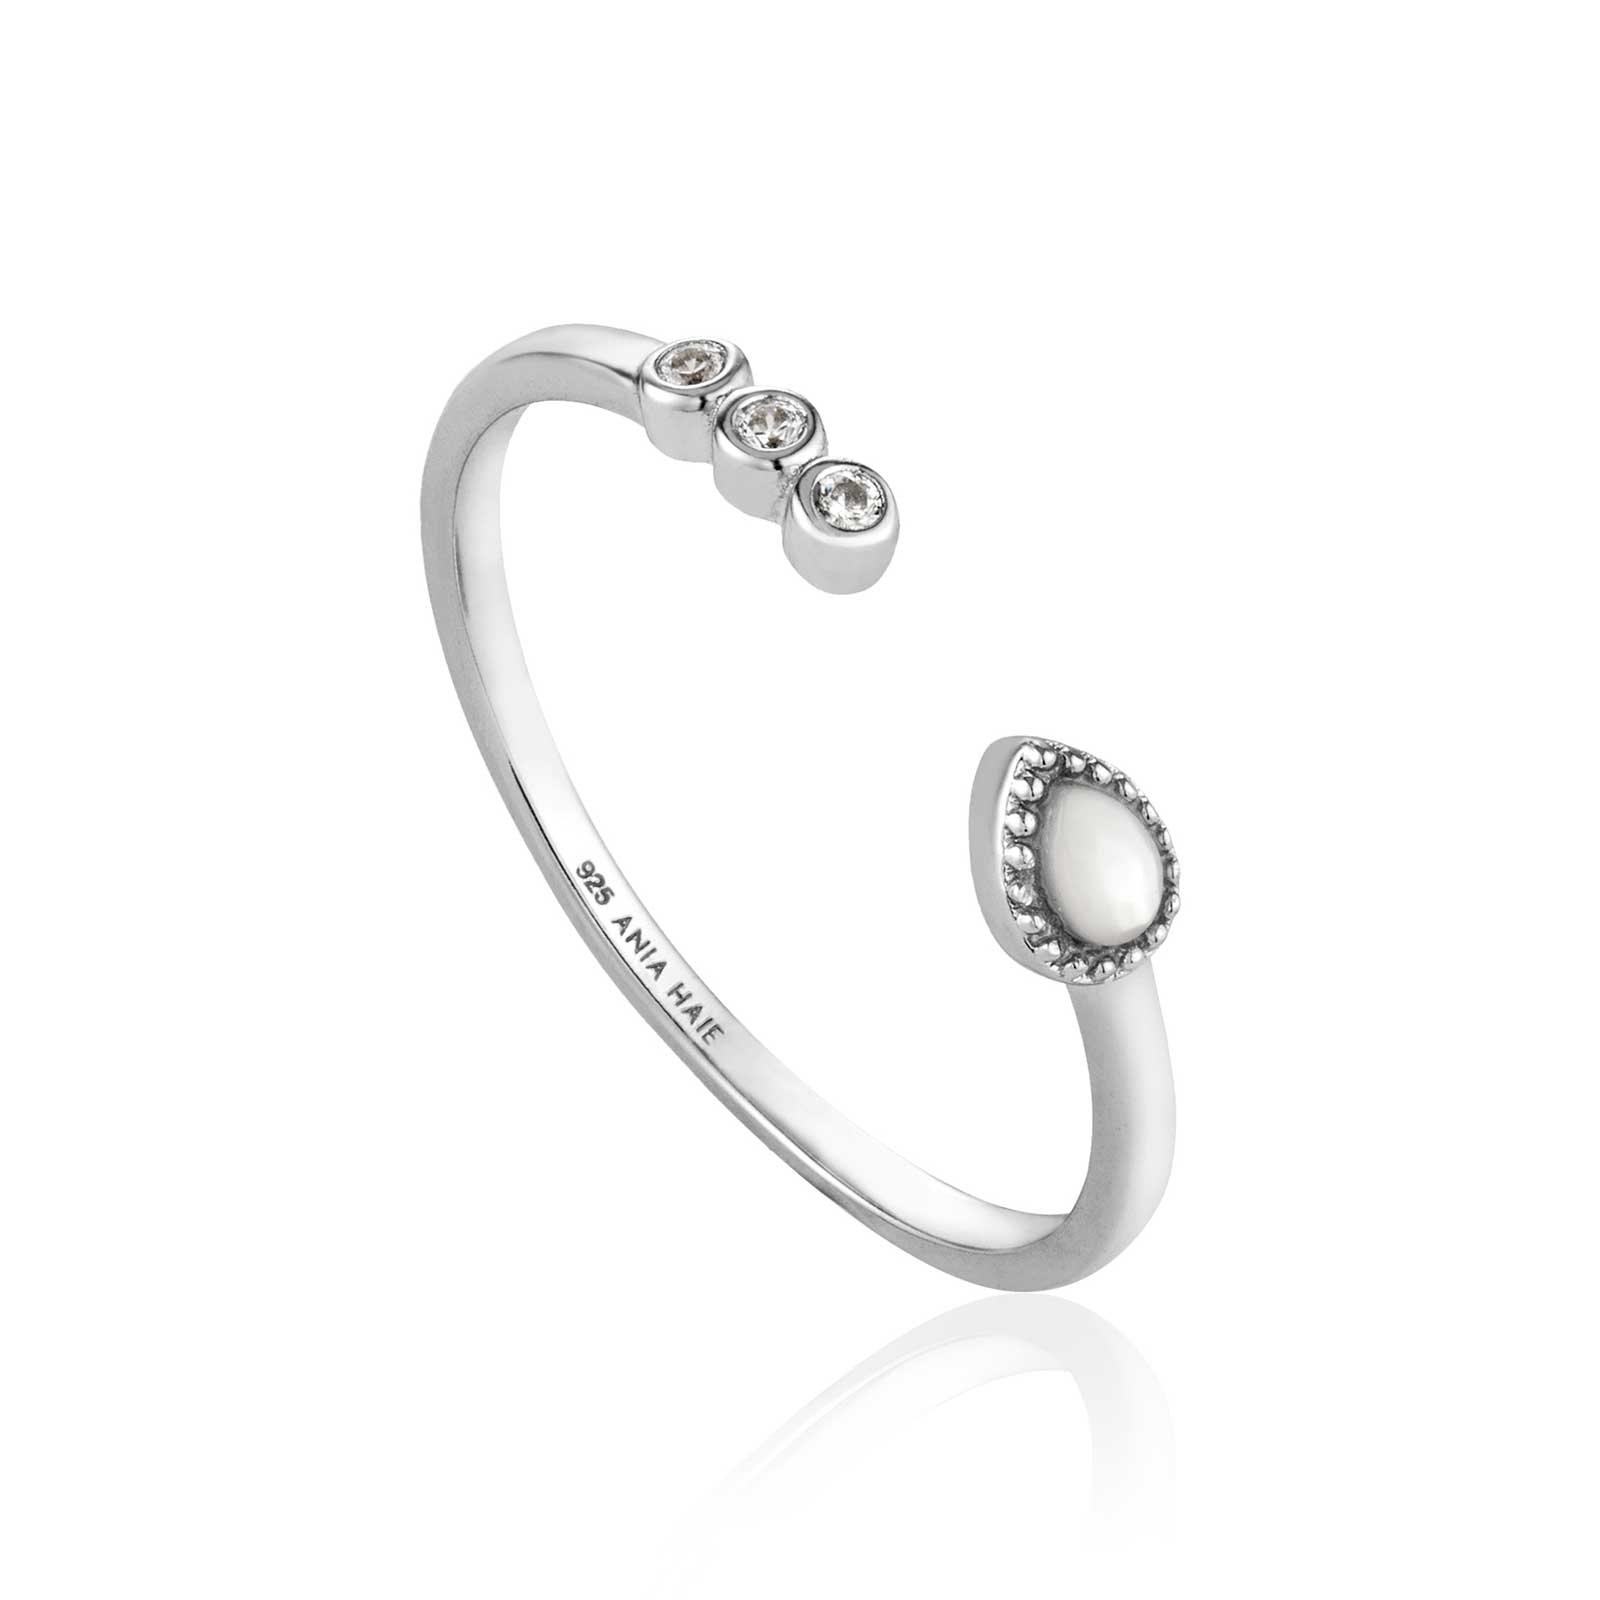 Ania Haie Dream Adjustable Ring, Sterling Silver: Precious Accents, Ltd.